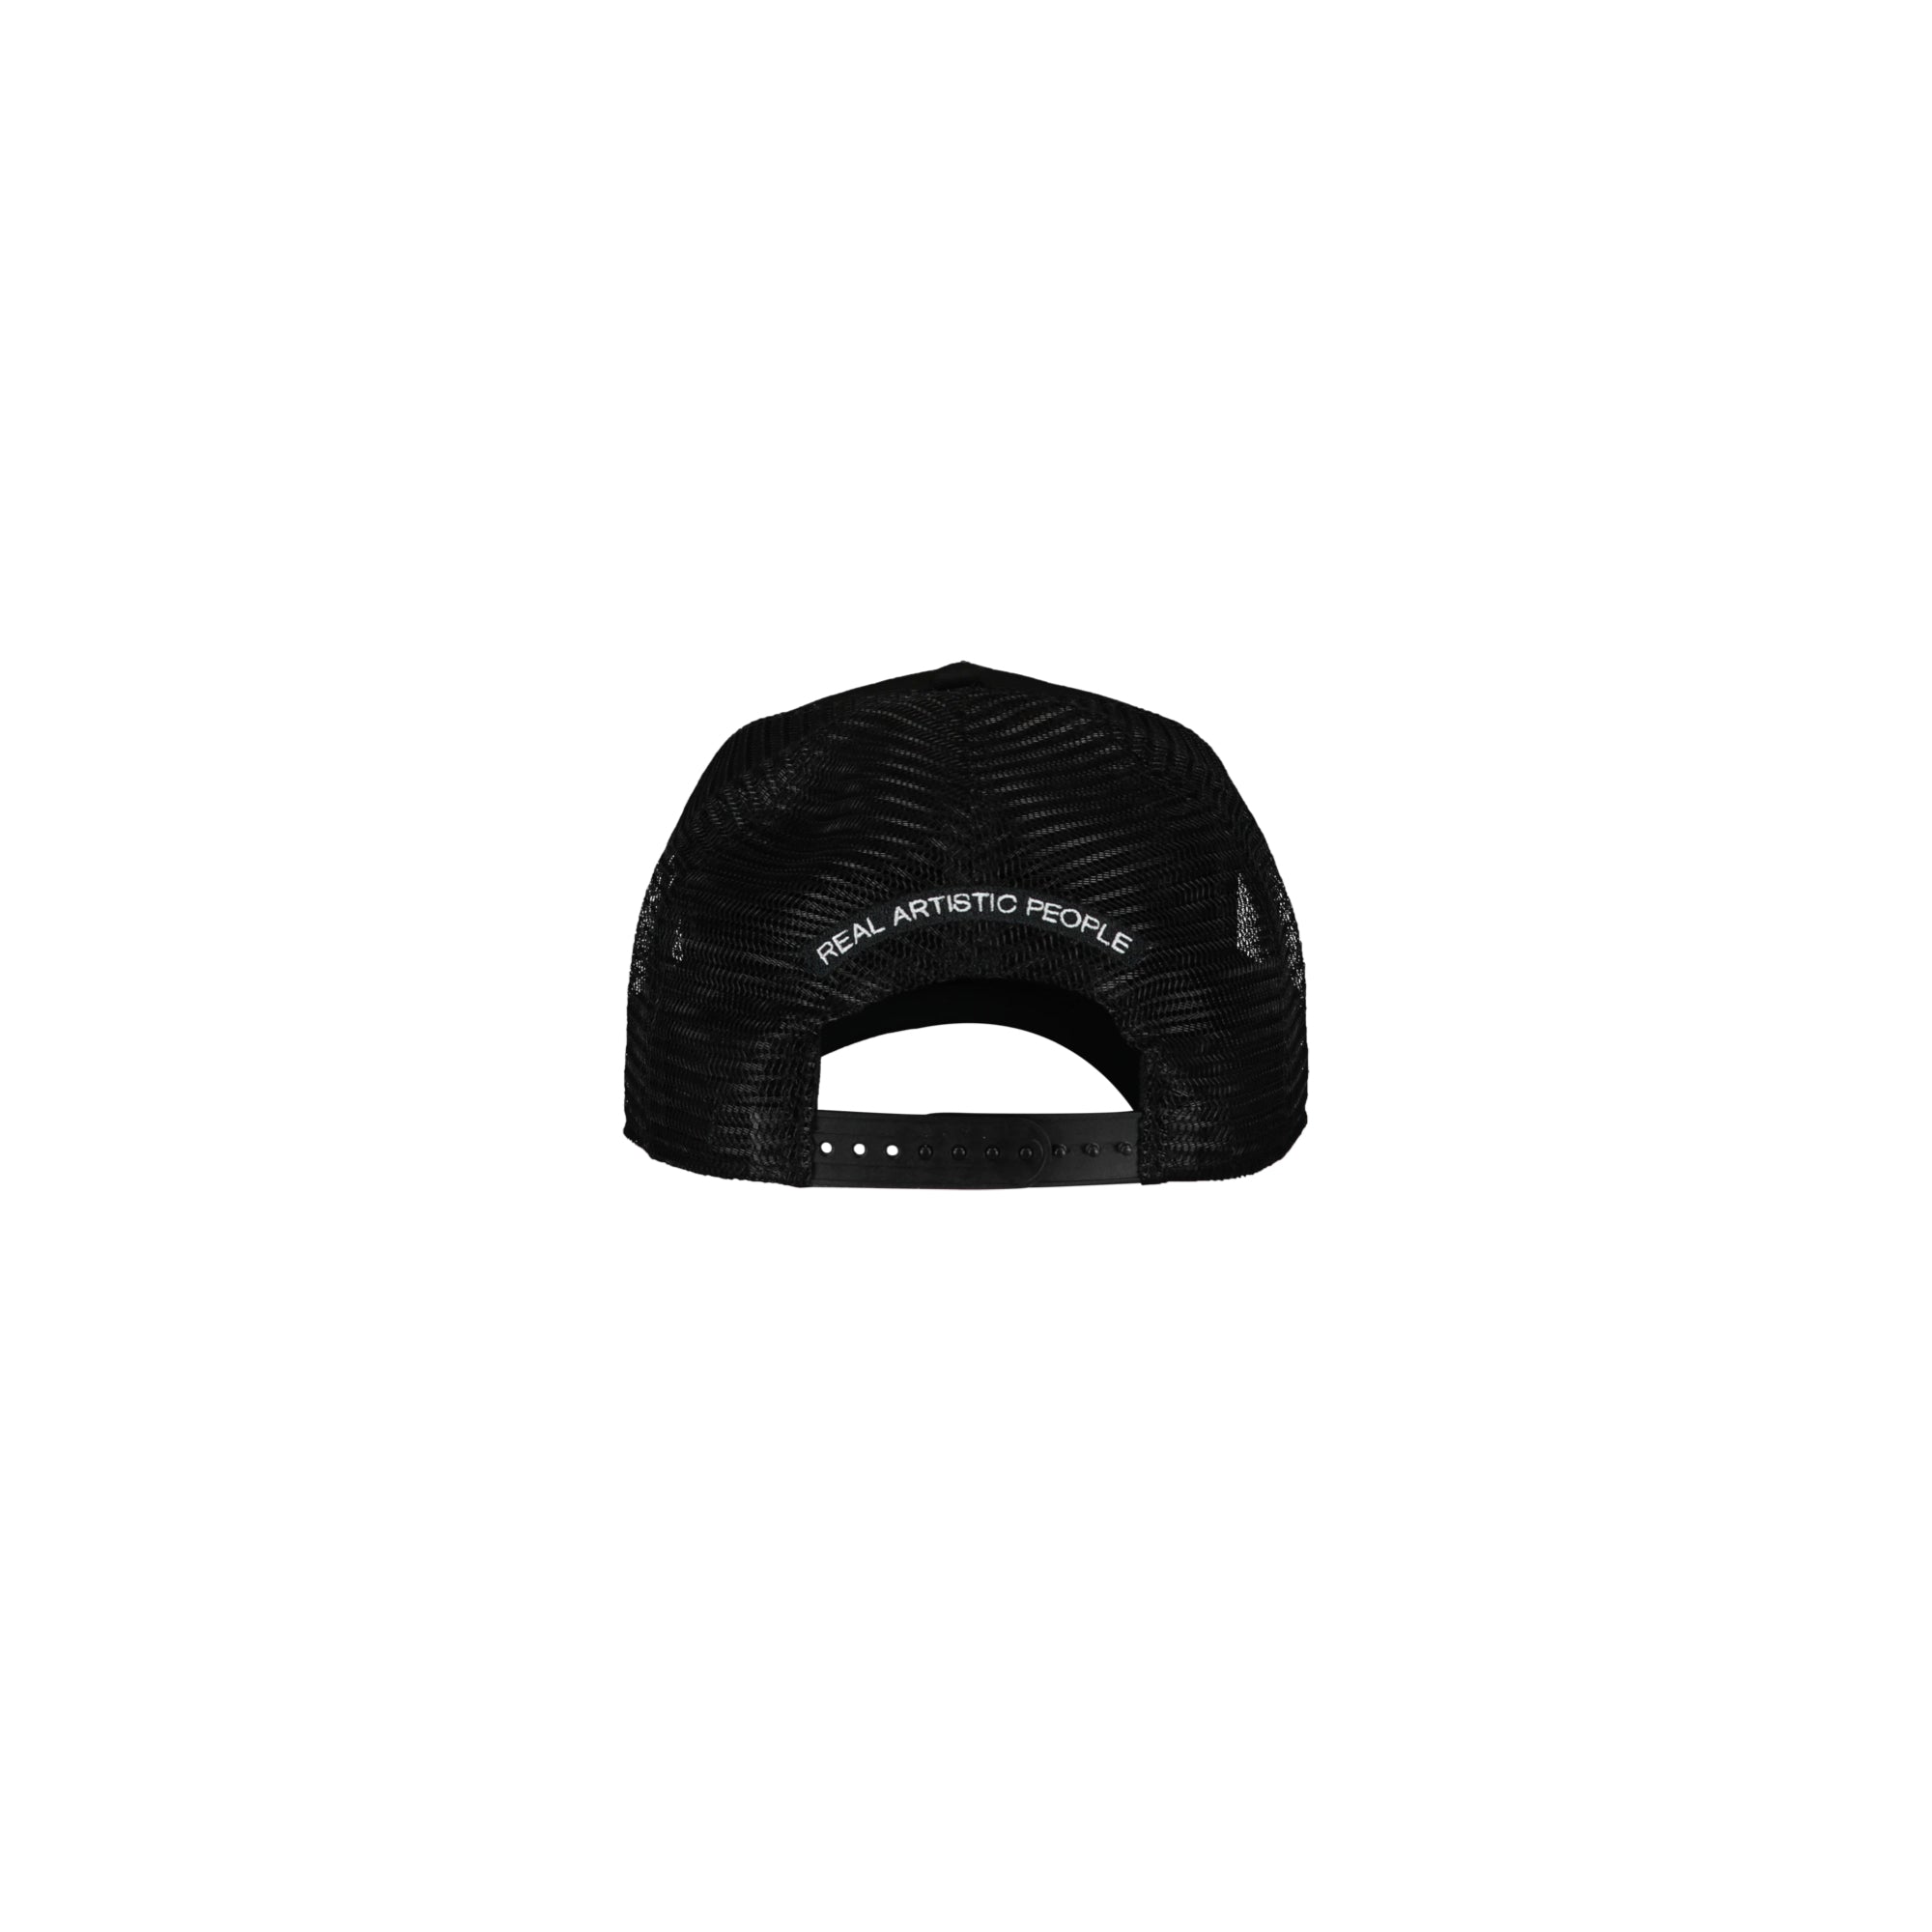 Real Artistic People For The Culture Trucker Cap - Black/White